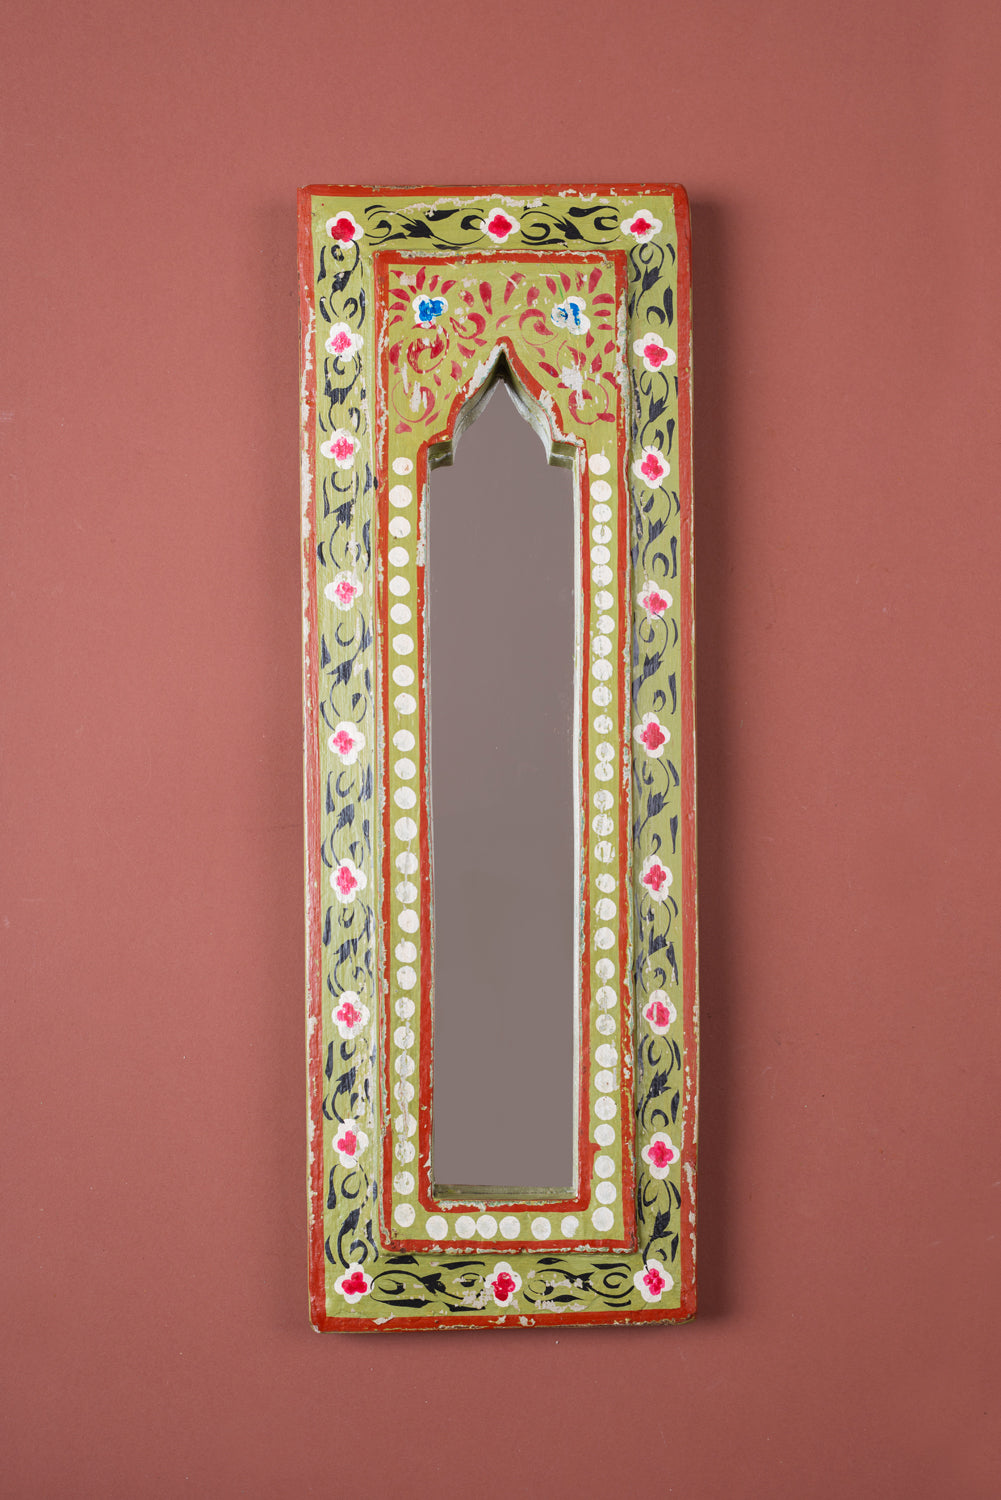 Hand Painted Vintage Arch Mirror (Re-worked) - 64